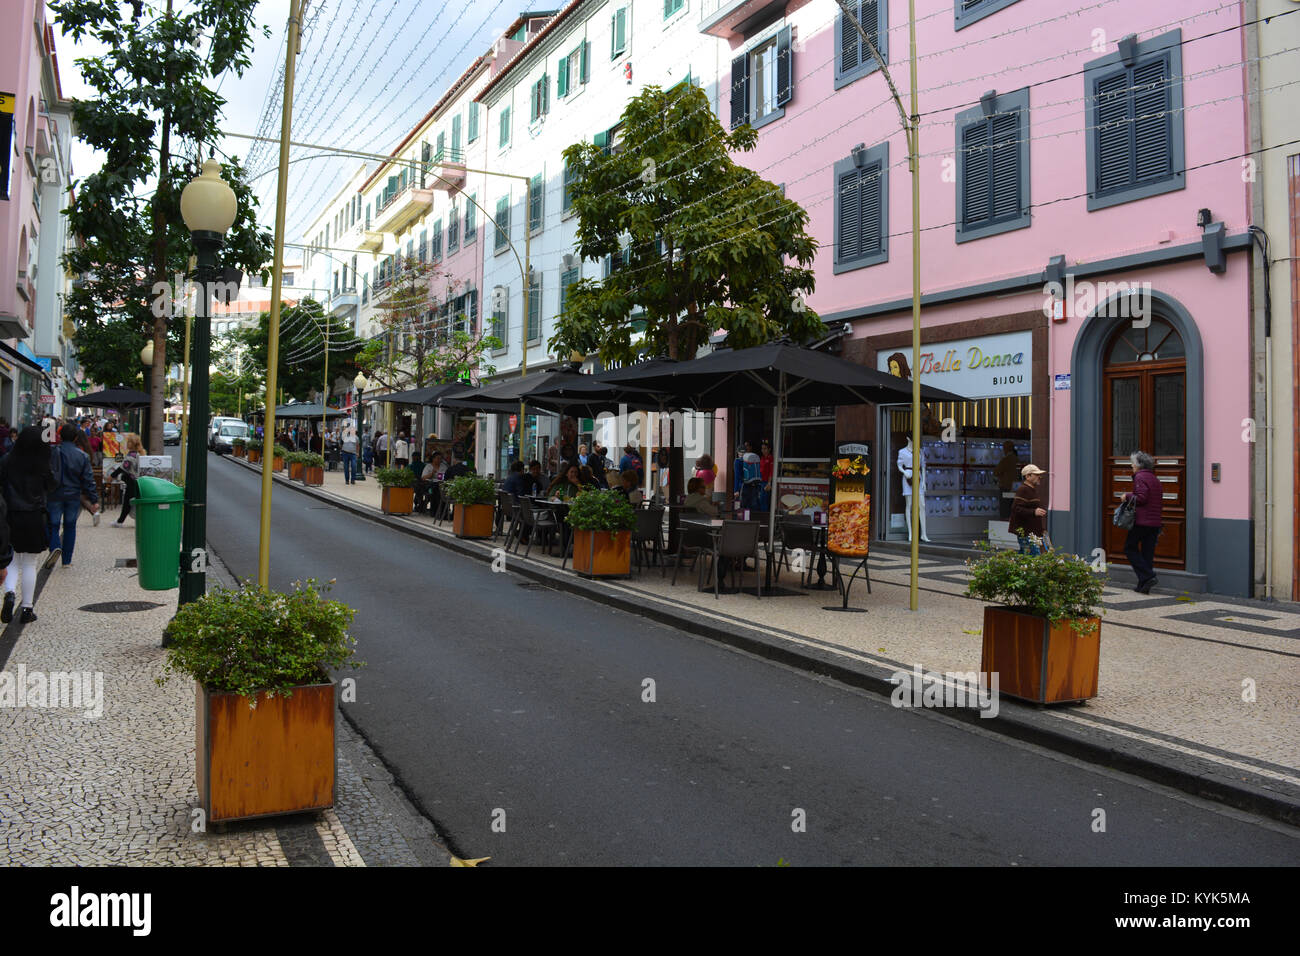 Street scene with a pavement cafe in Rua Dr. Fernão de Ornelas, the commercial centre of Funchal, Madeira, Portugal Stock Photo